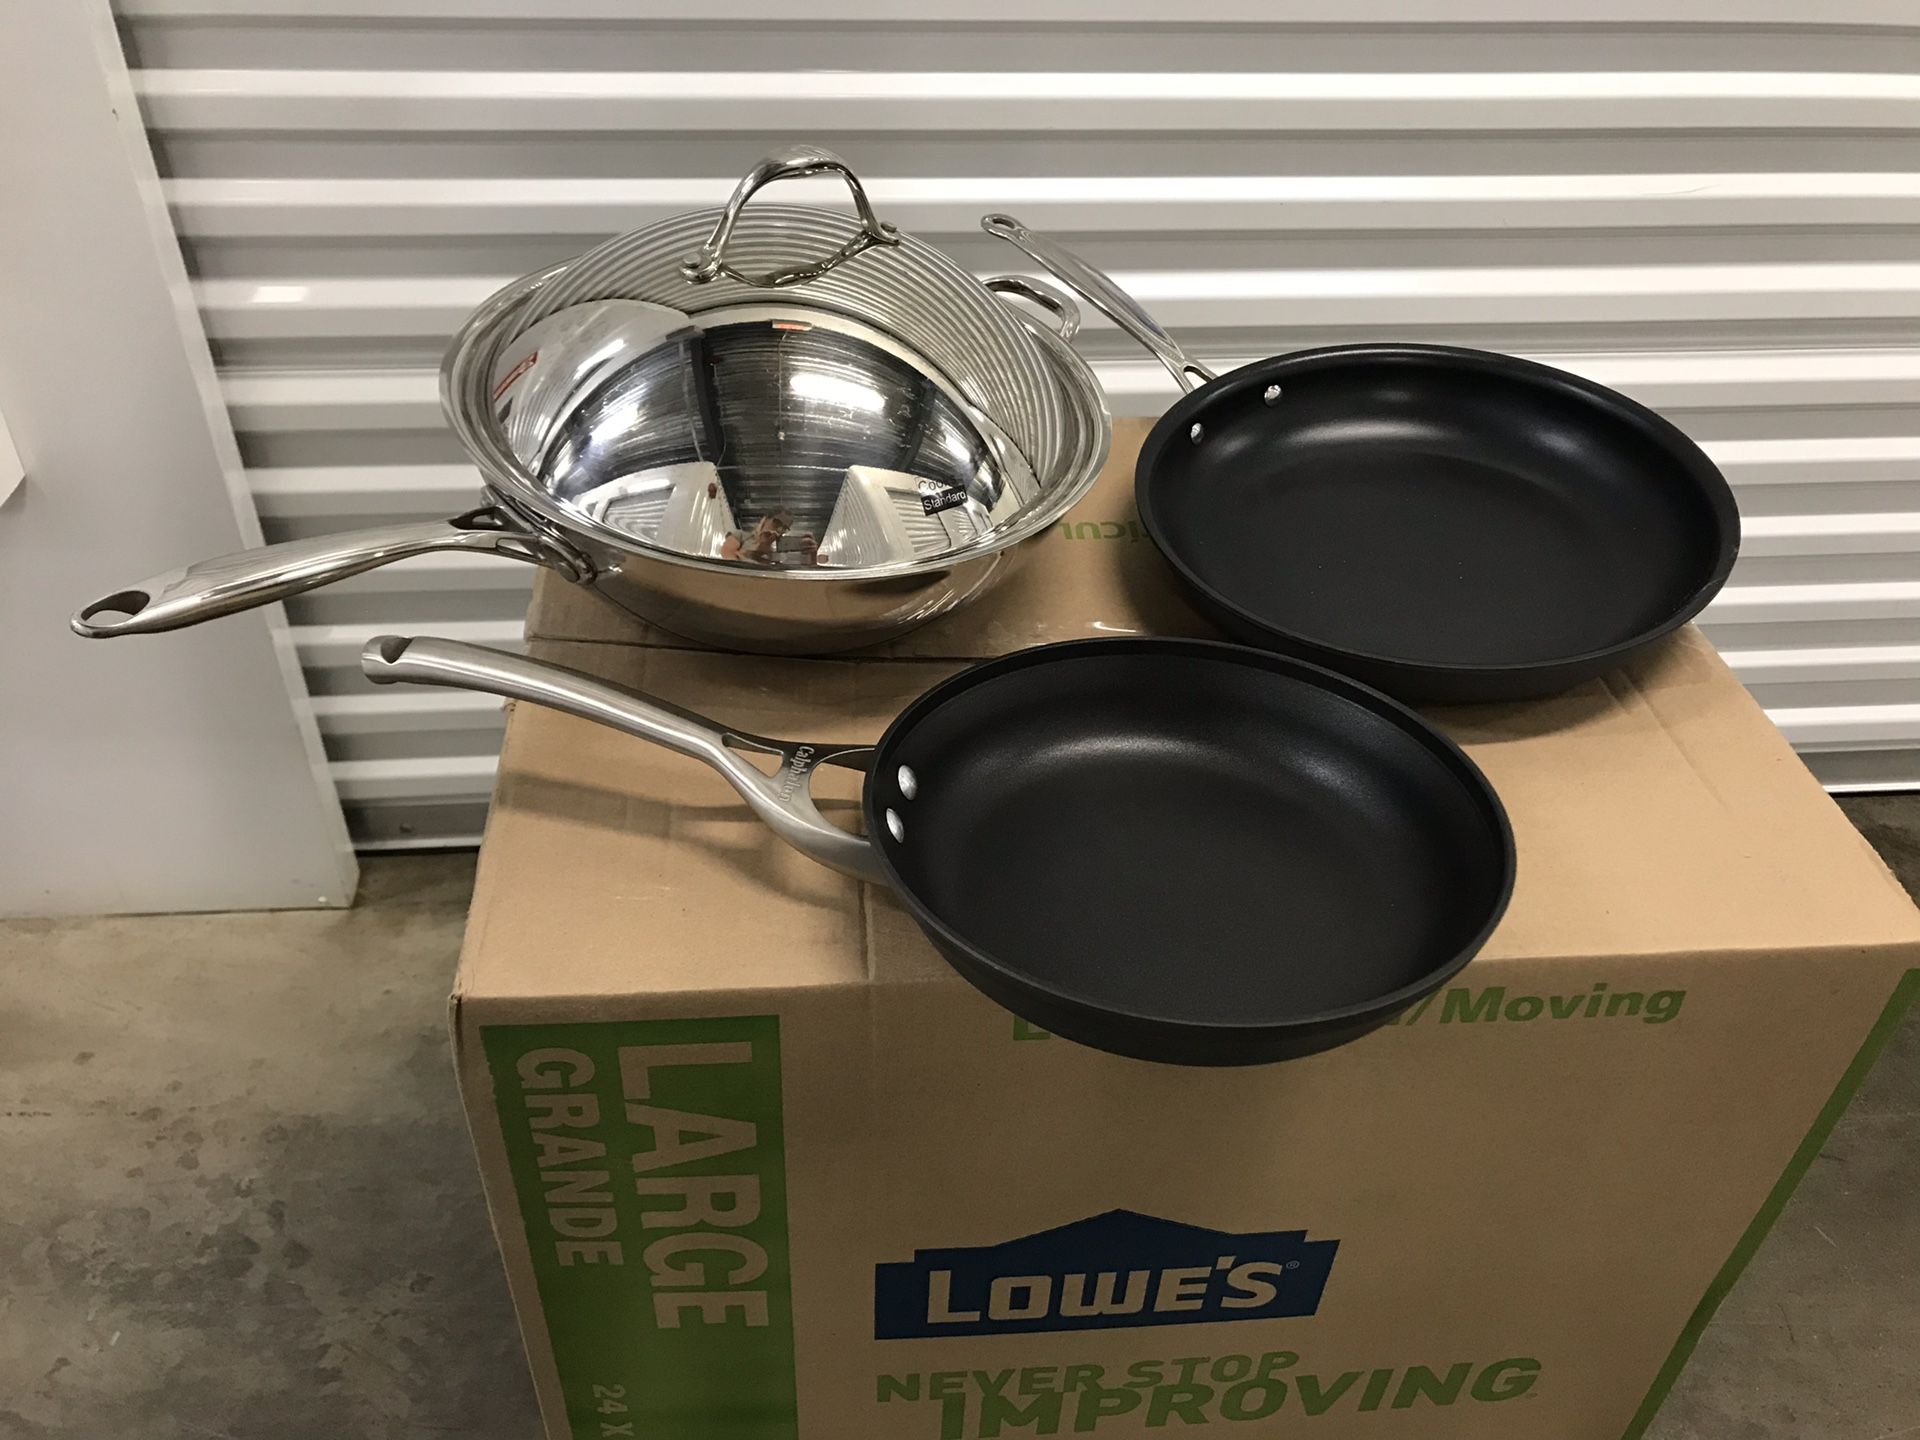 Wok (stainless steel) And Two Non-Stick Pans